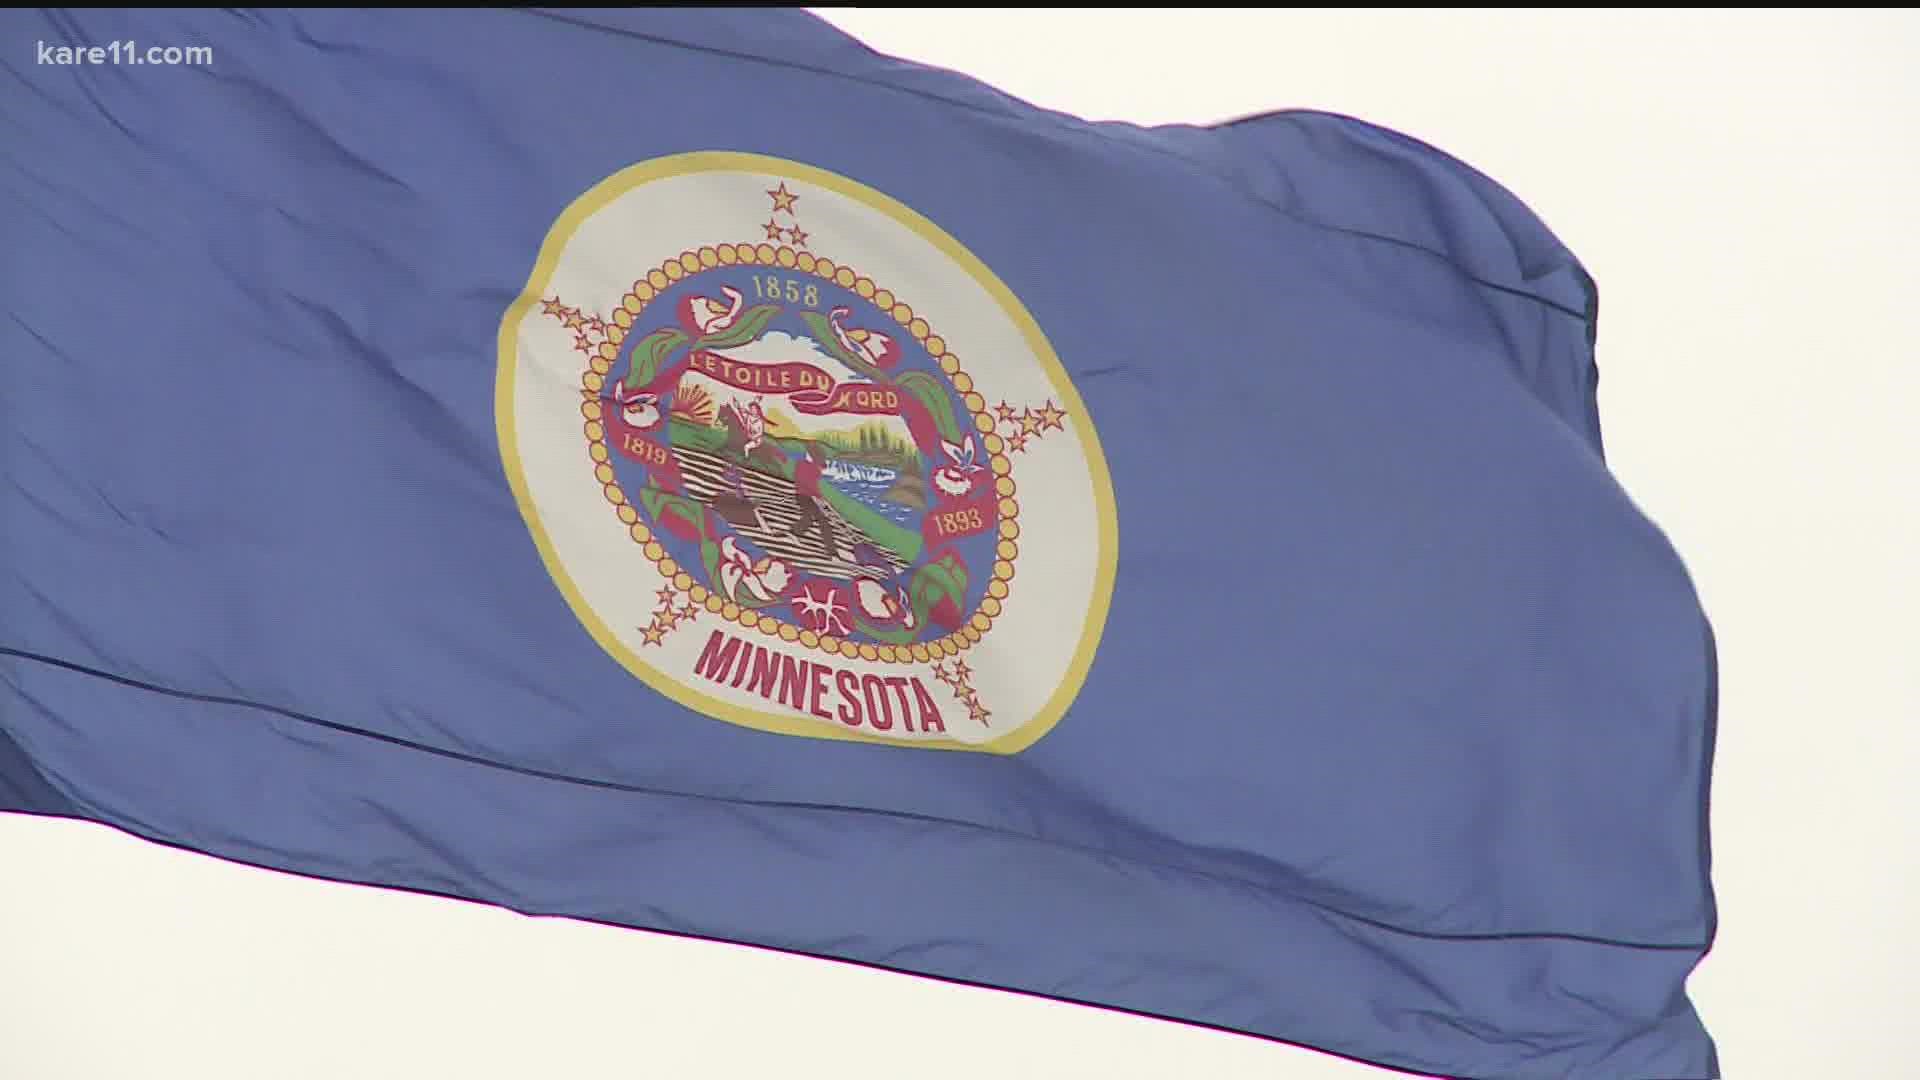 By law, the state flag has to carry the state seal, but some at the Capitol think it's time both should be updated.